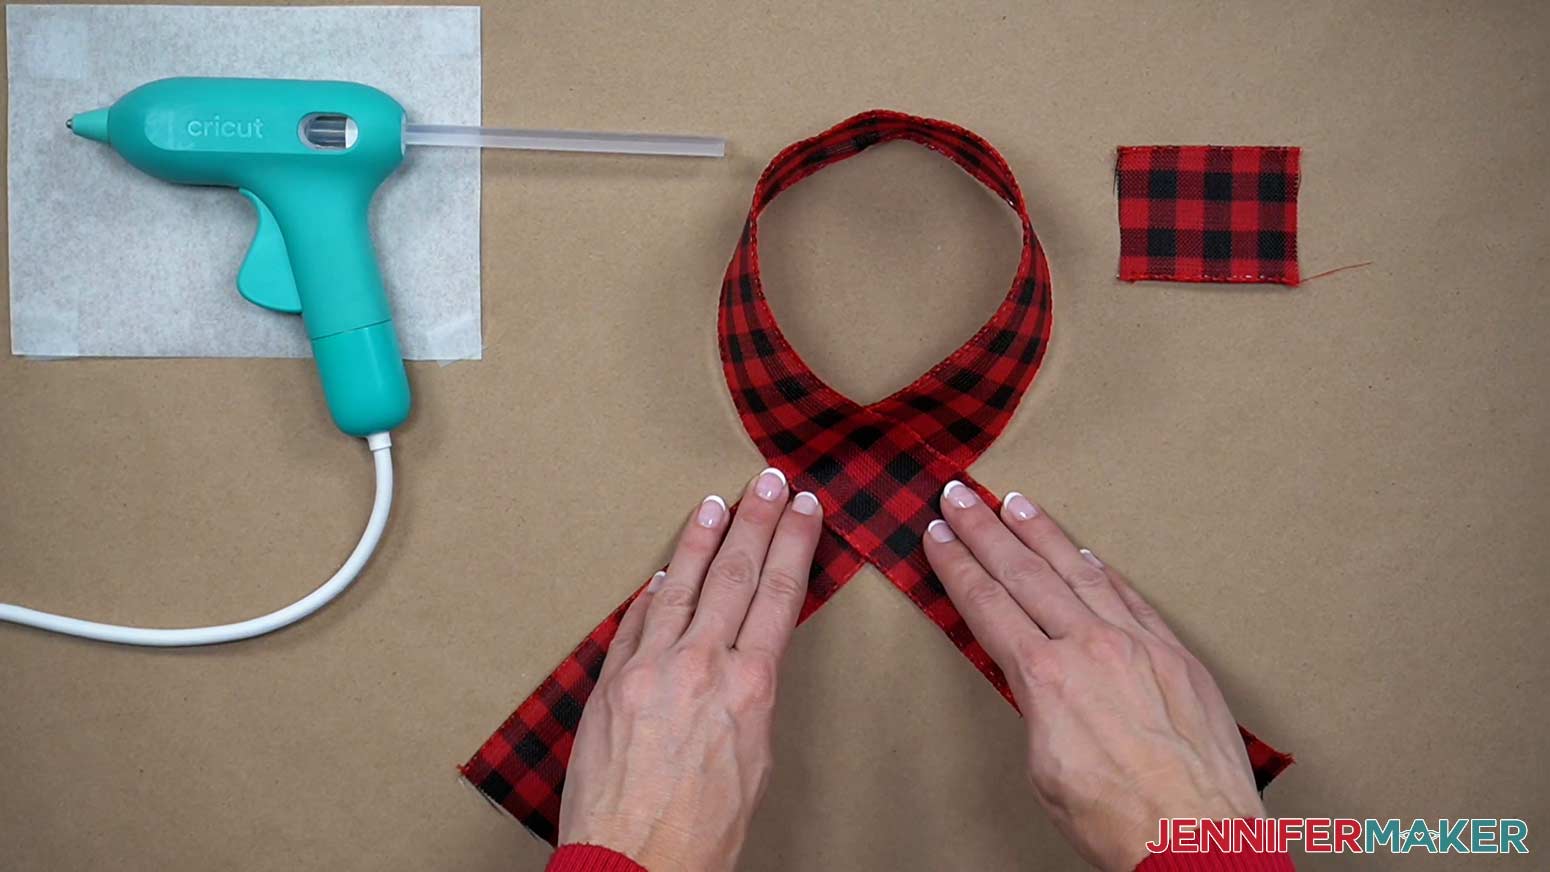 Make a loop with the ribbon so the ribbon crosses itself where the loop is the same size as the end pieces below where the ribbon crosses itself.